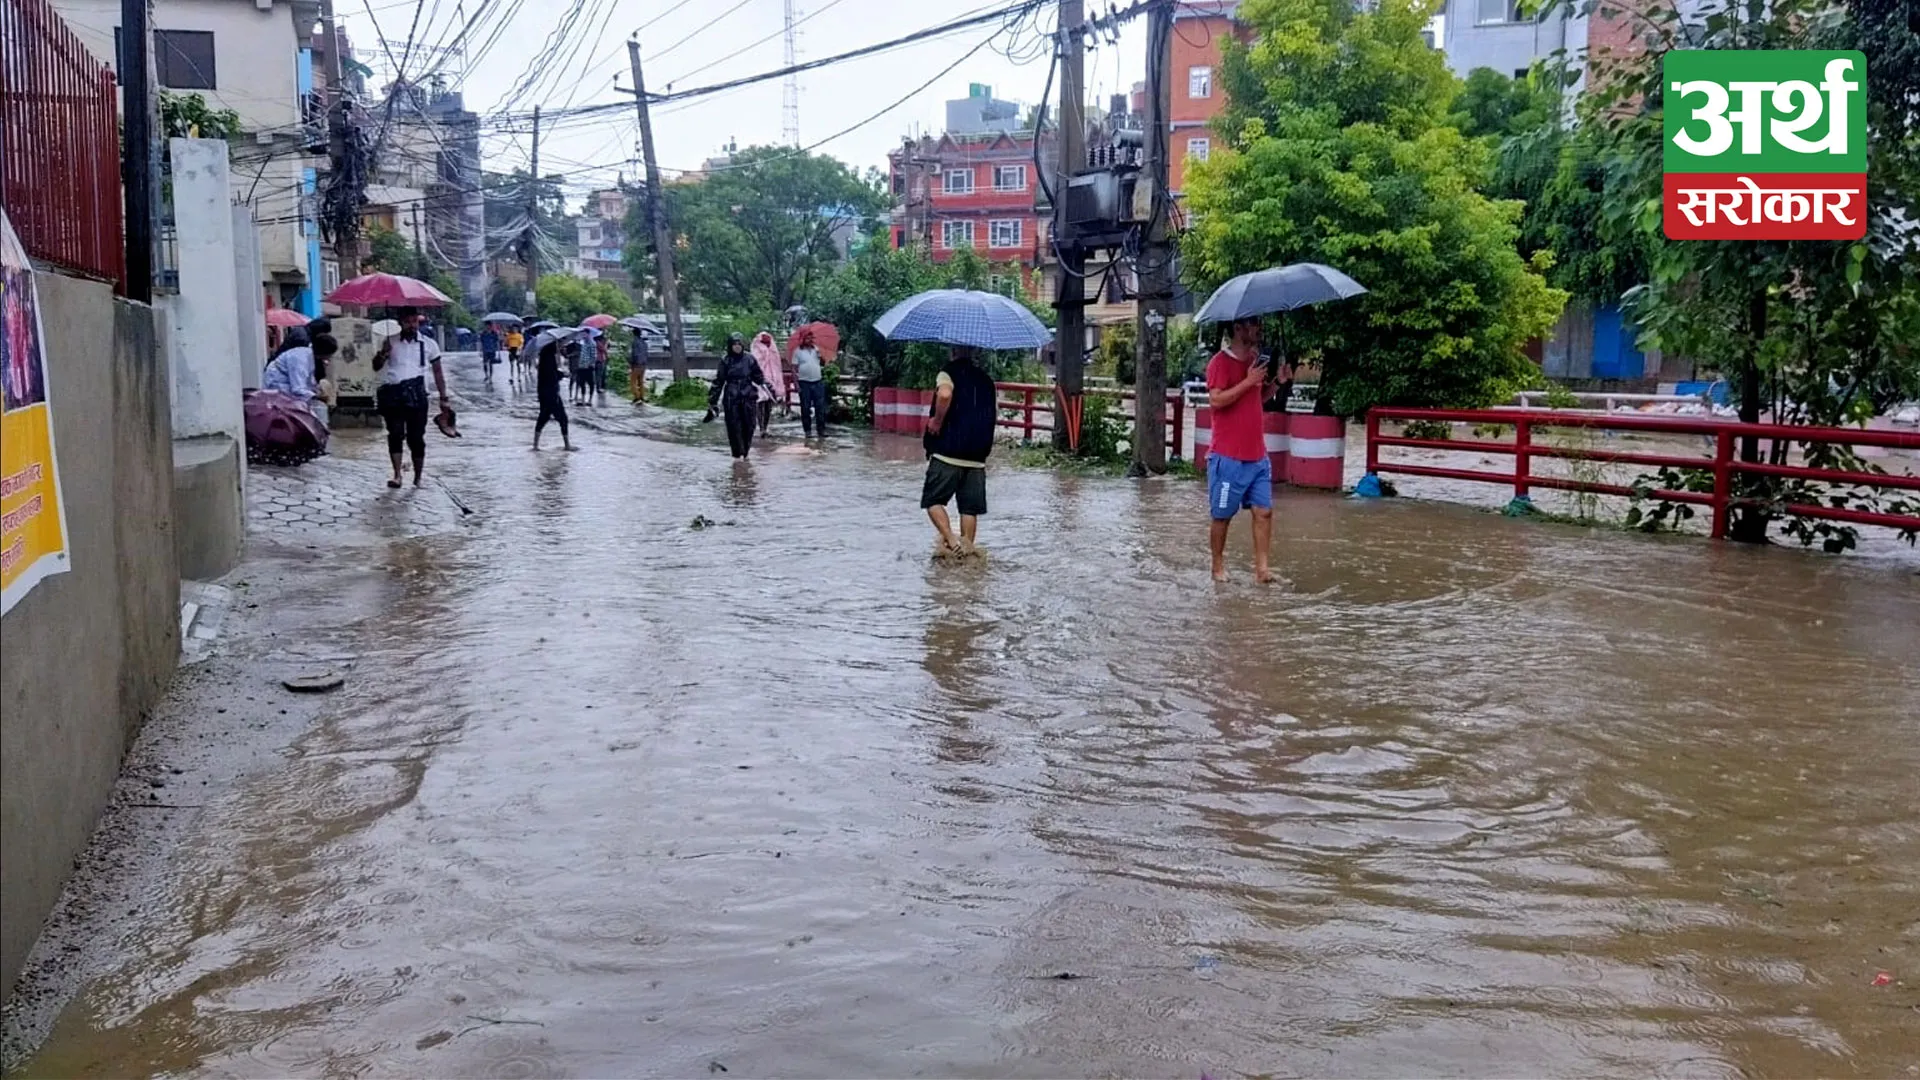 Downpour in Kathmandu Valley: Alert issued for safety